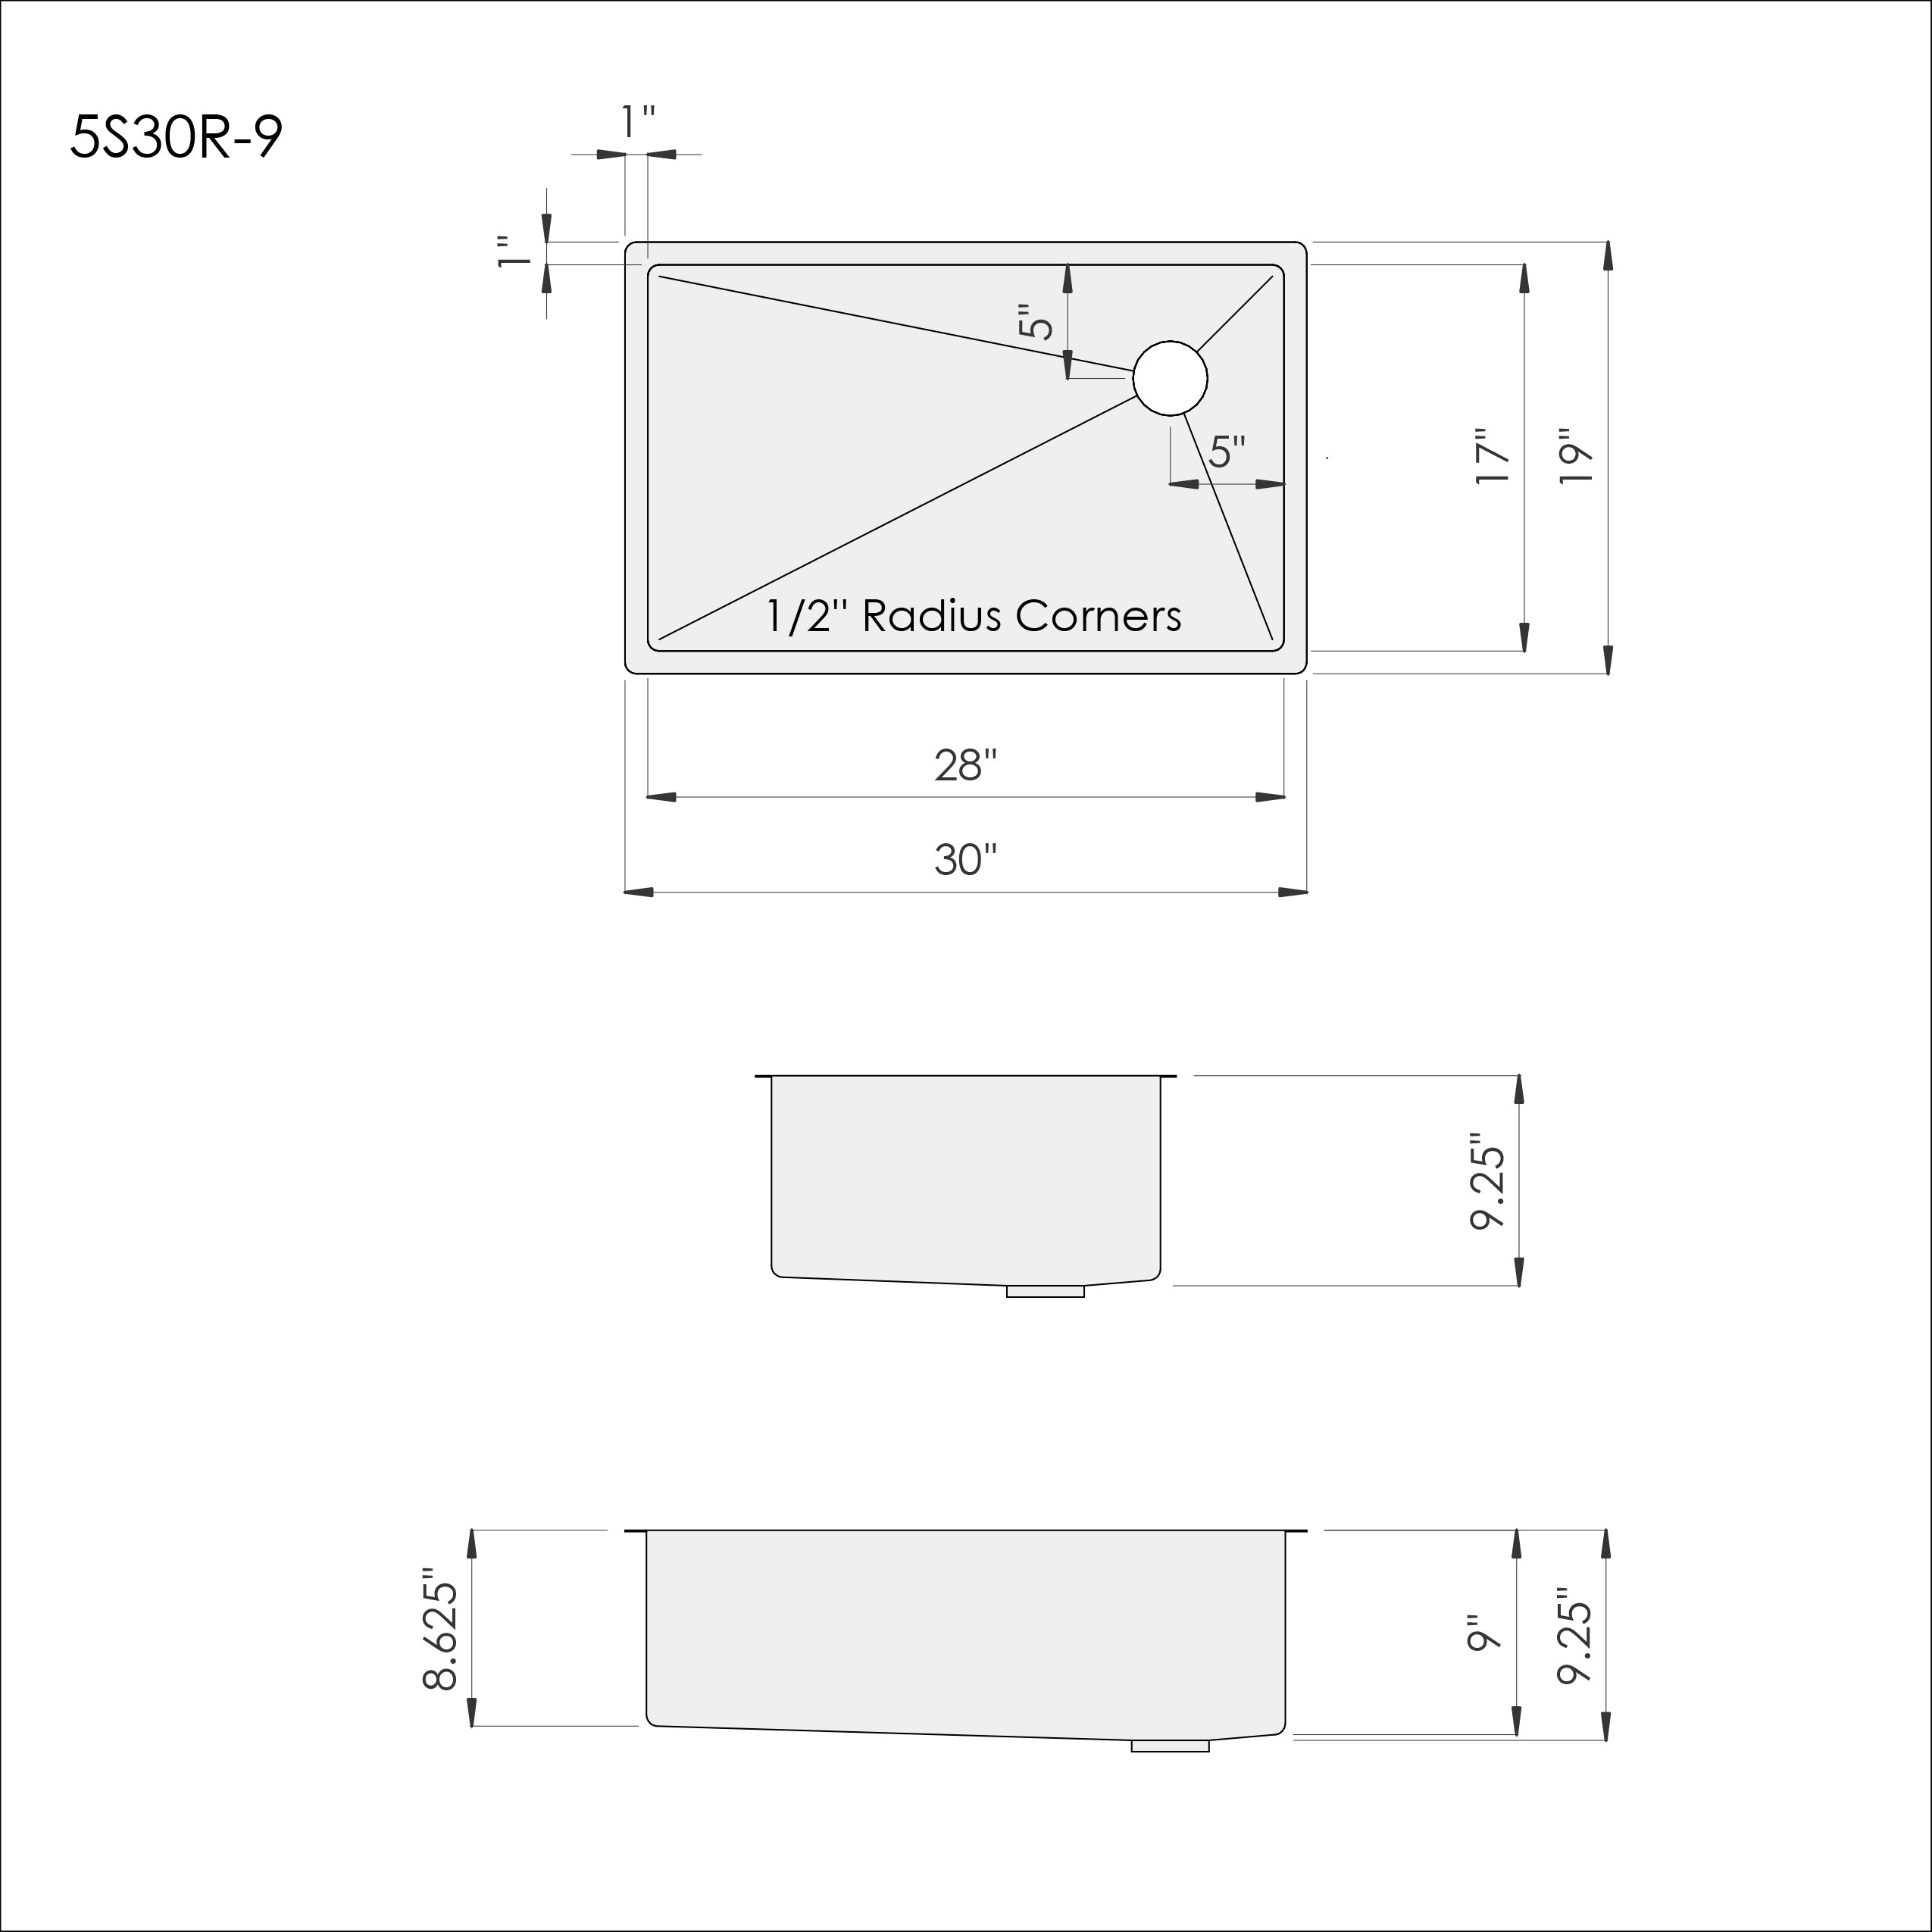 Dimensions of Create Good Sinks 30 inch stainless steel undermount kitchen sink with offset drain on the right. Patented seamless drain design and 9 inch depth